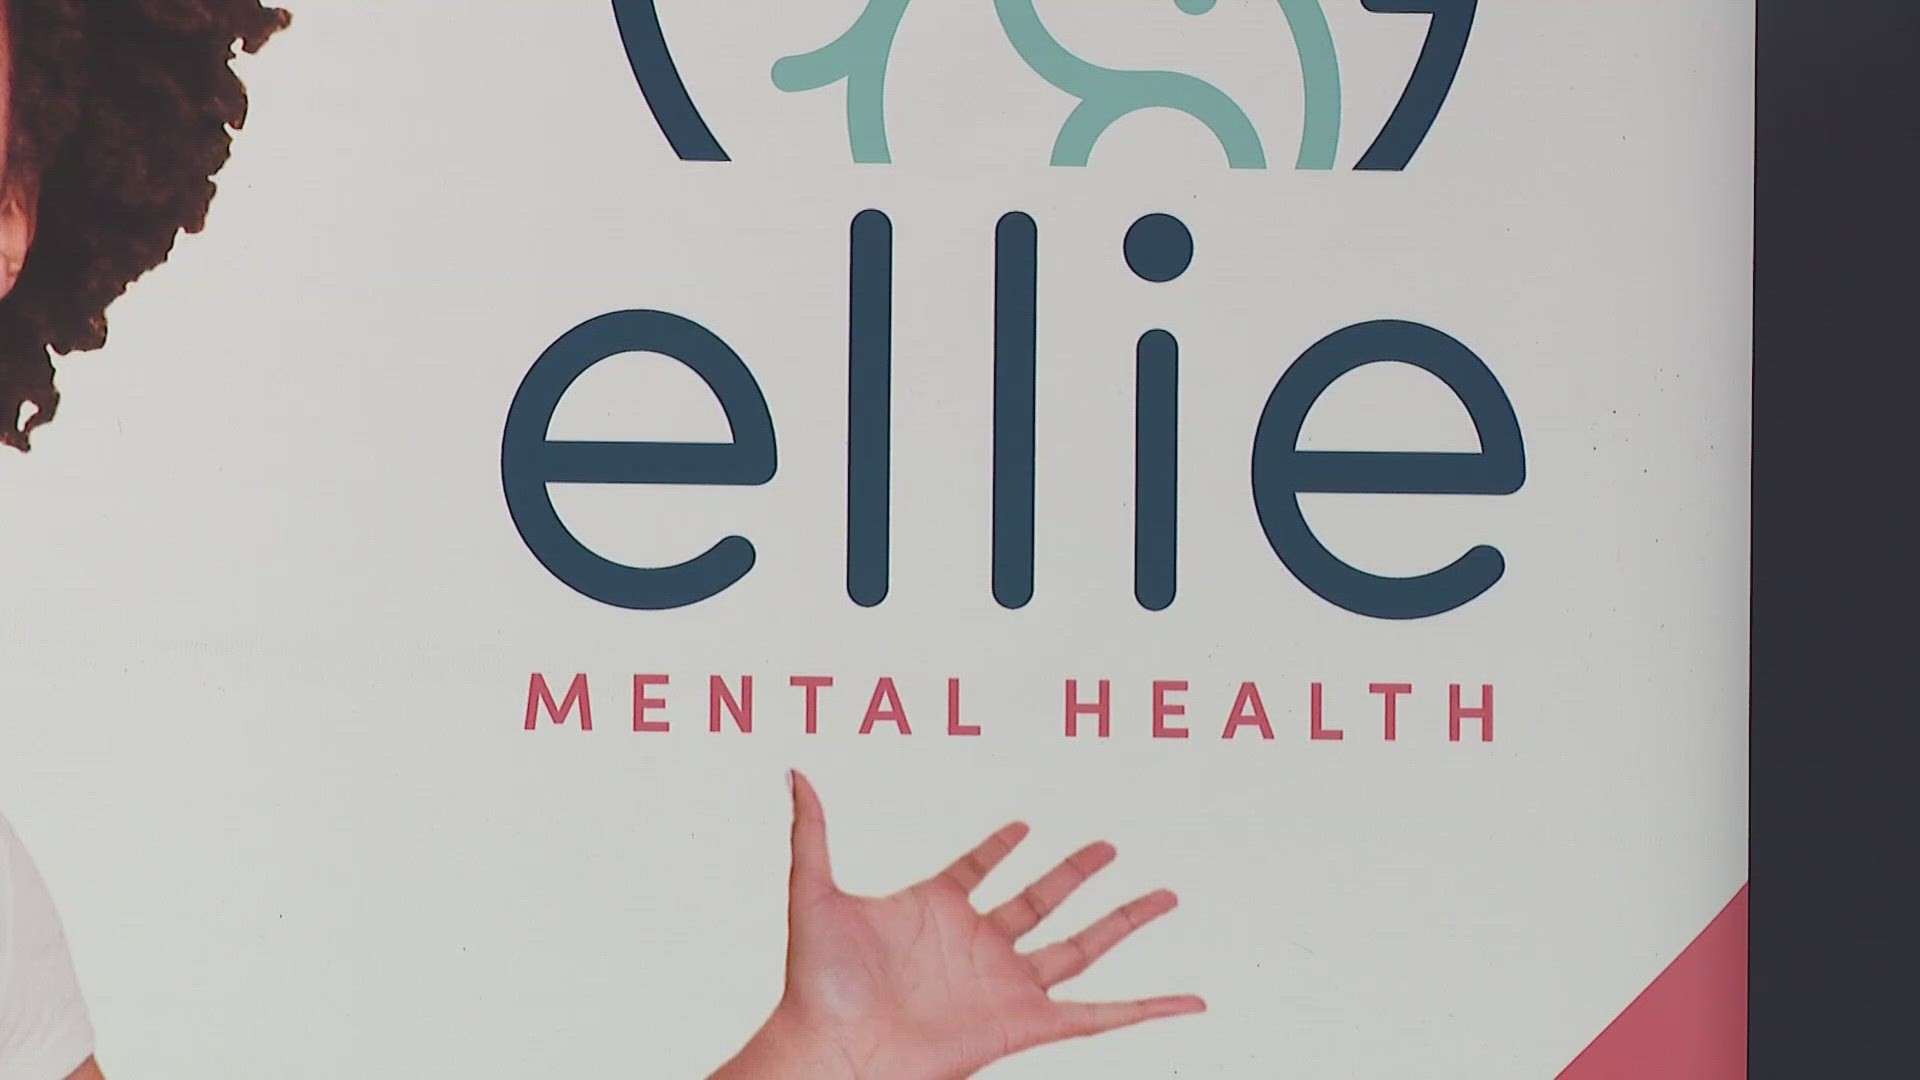 The mission of Ellie Mental Health is to make mental health services more accessible.